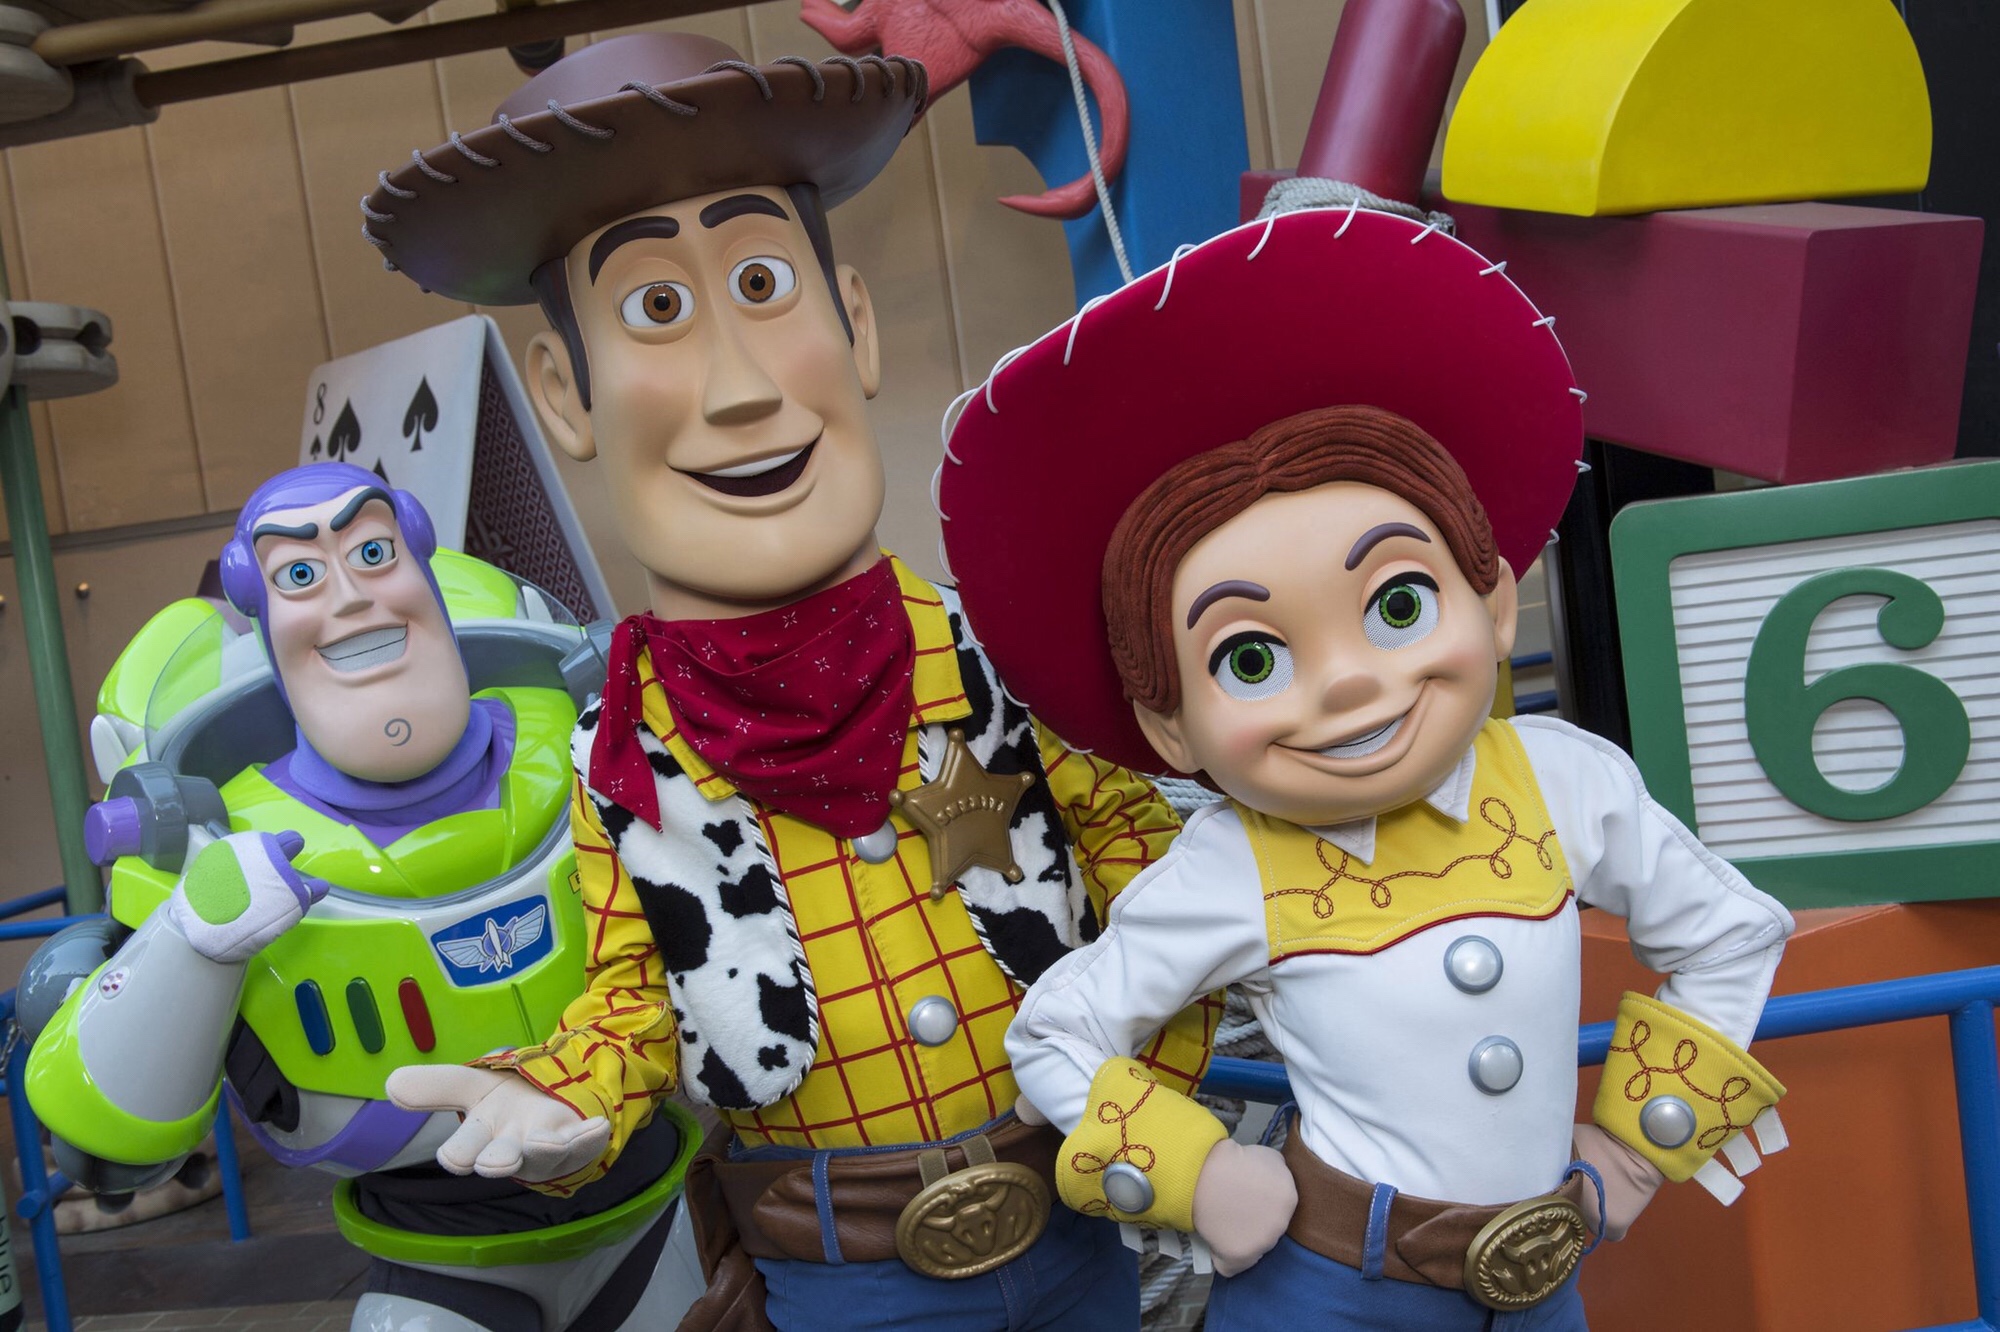 Jessie Joins Buzz Lightyear and Woody as Toy Story Land Meet and Greet Char...